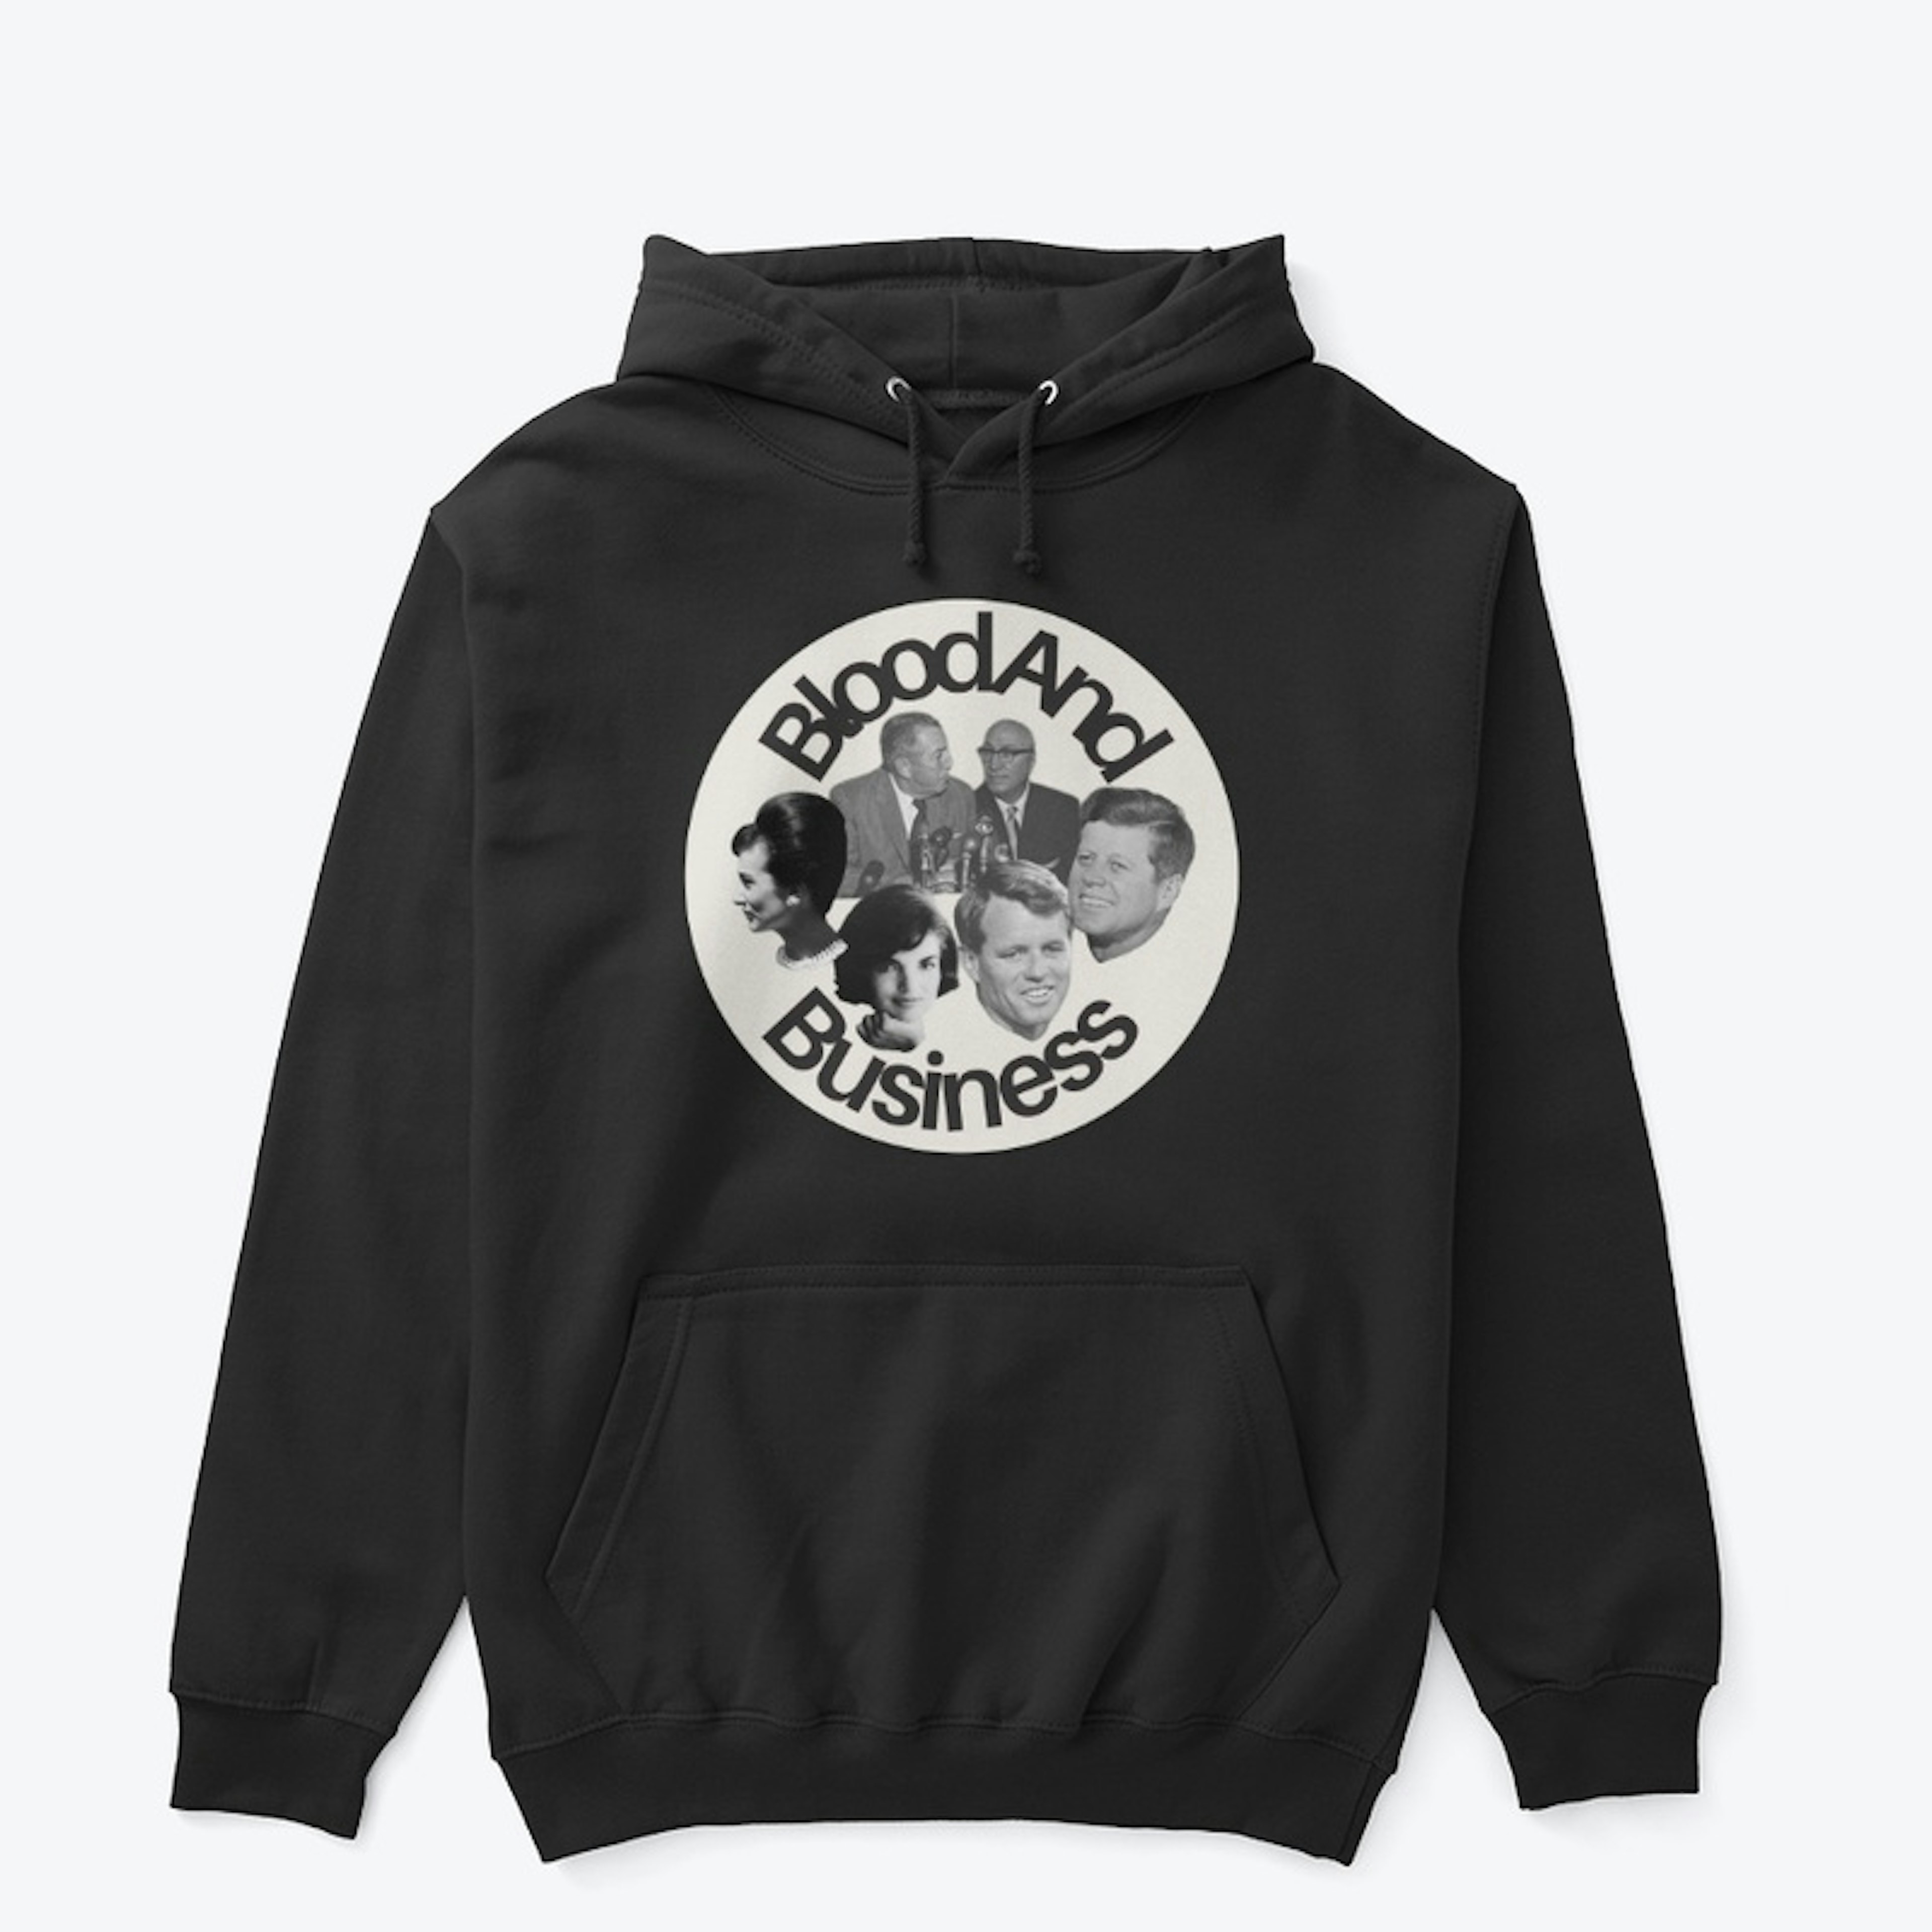 NEW Blood and Business Merch